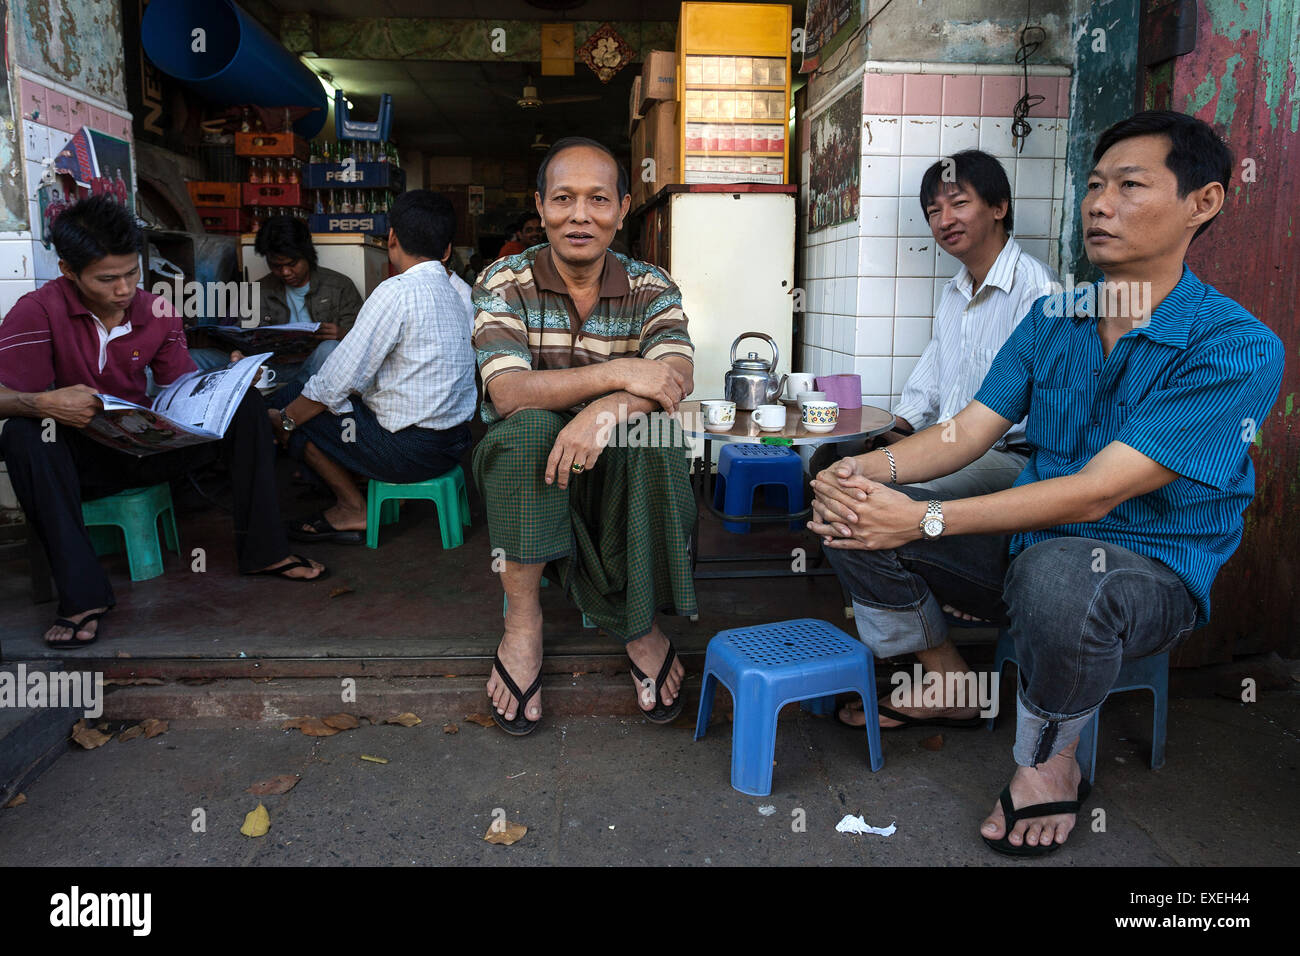 Local men drinking coffee in front of a small cafe, Yangon, Myanmar Stock Photo